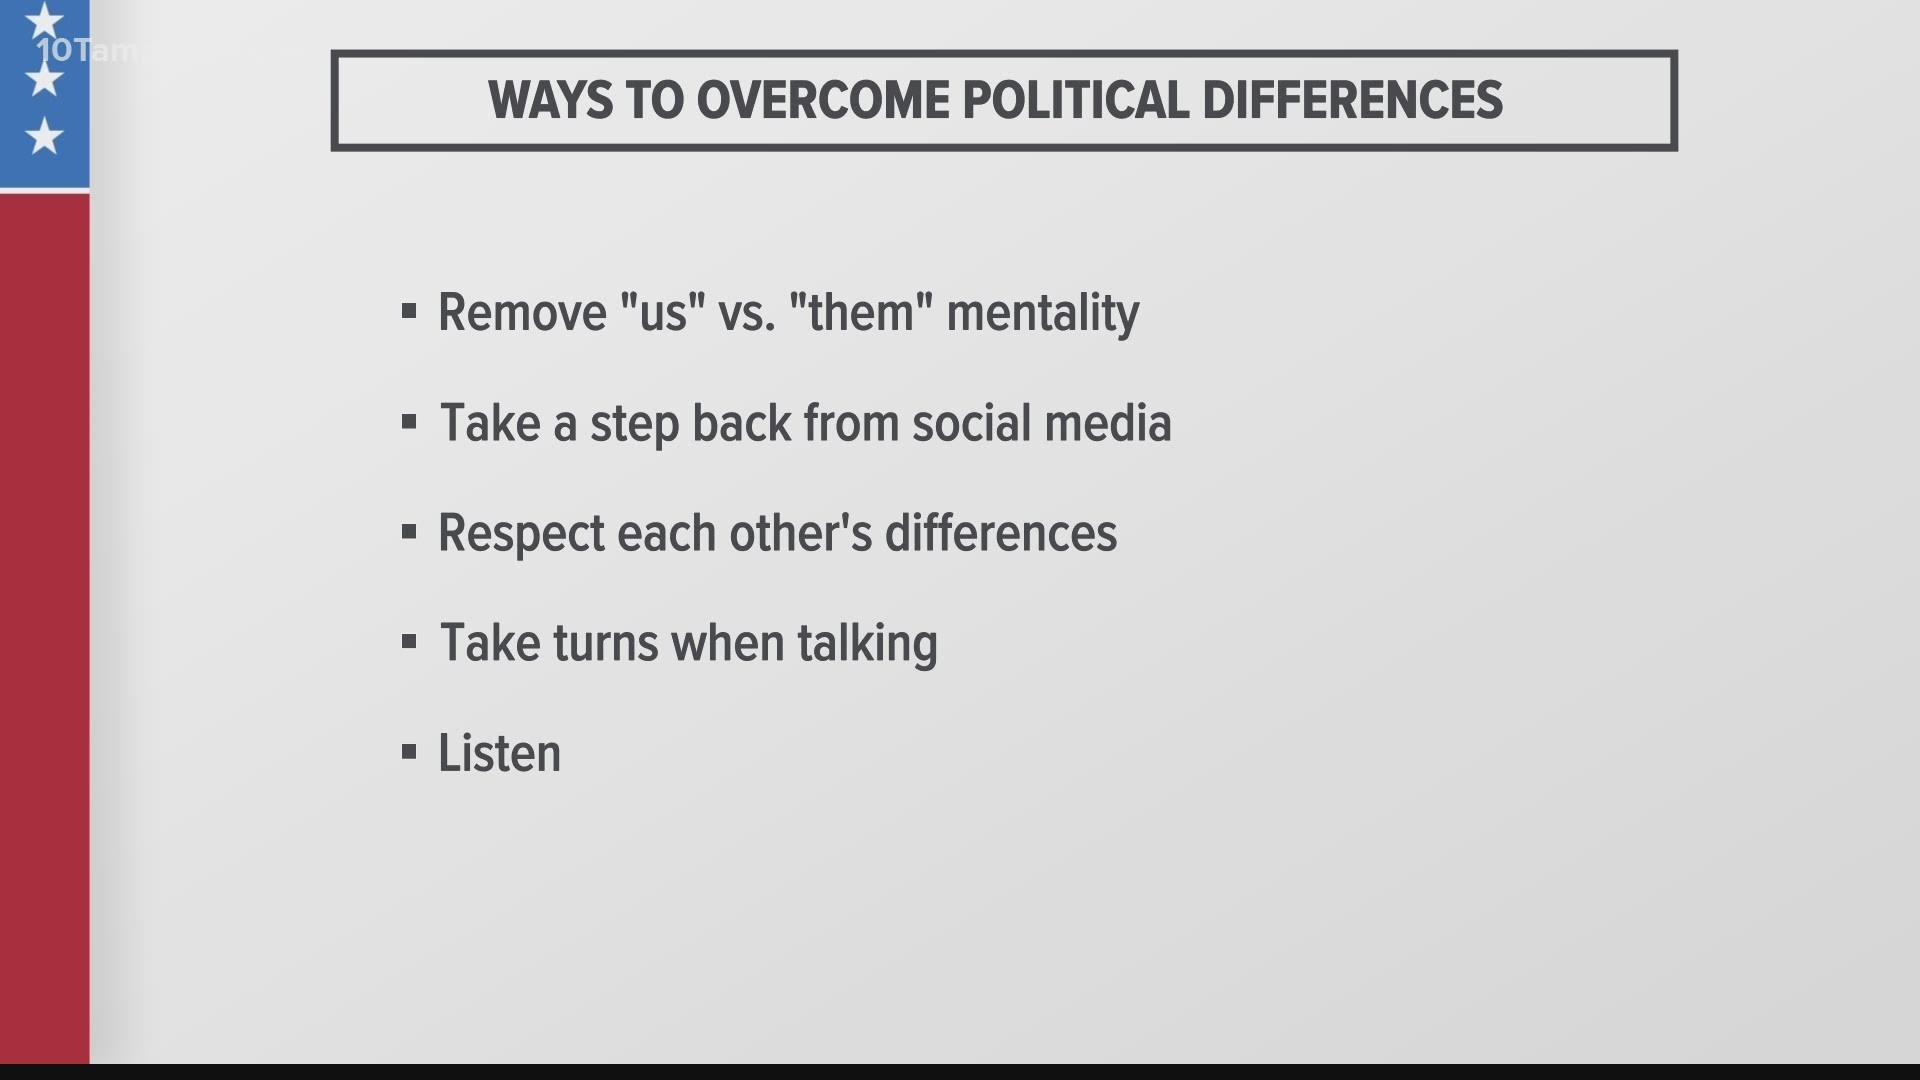 Ways to find peace in relationships when you disagree politically.